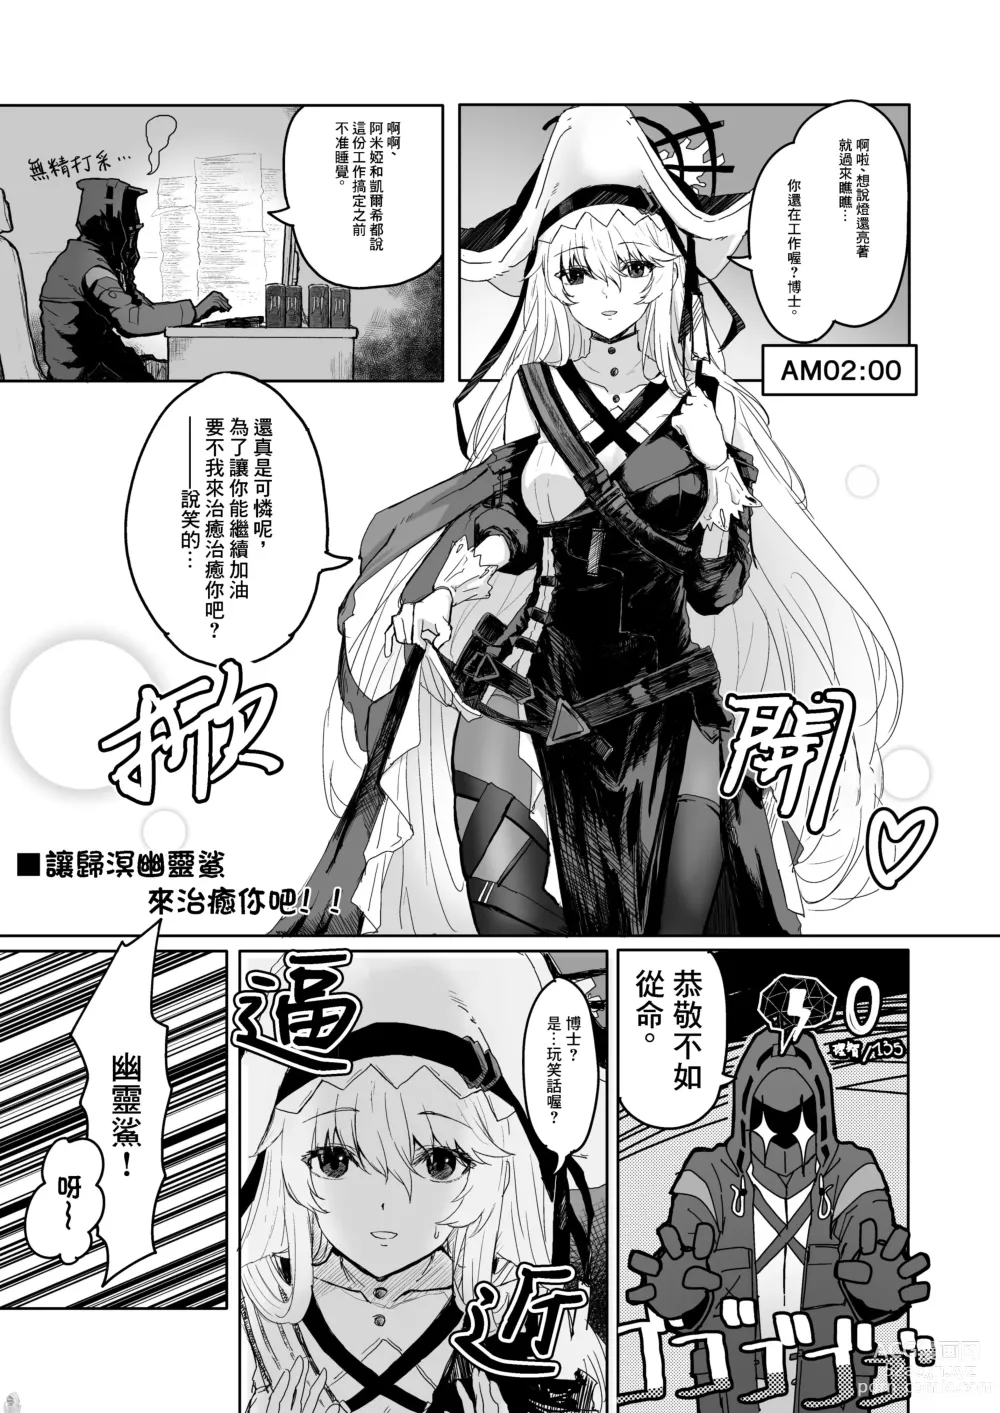 Page 32 of doujinshi Twitter collection